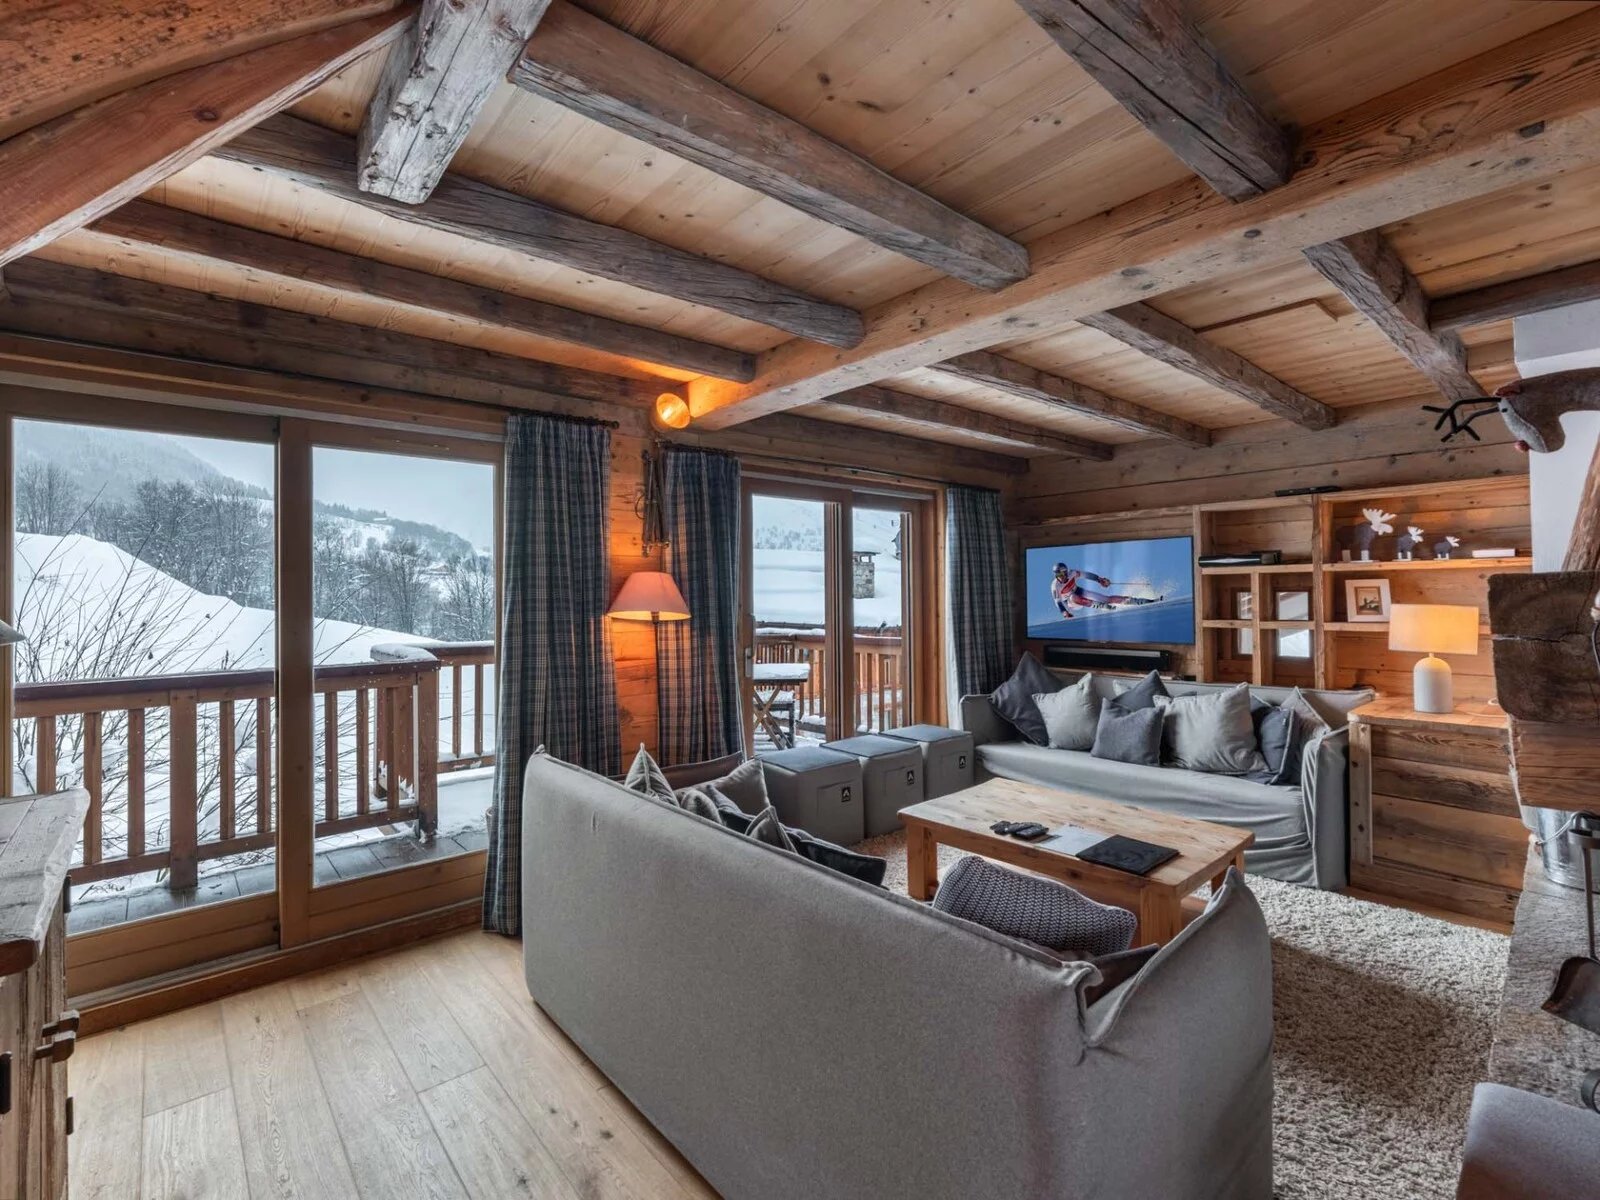 AUTHENTIC CHALET A FEW METRES FROM THE SLOPES